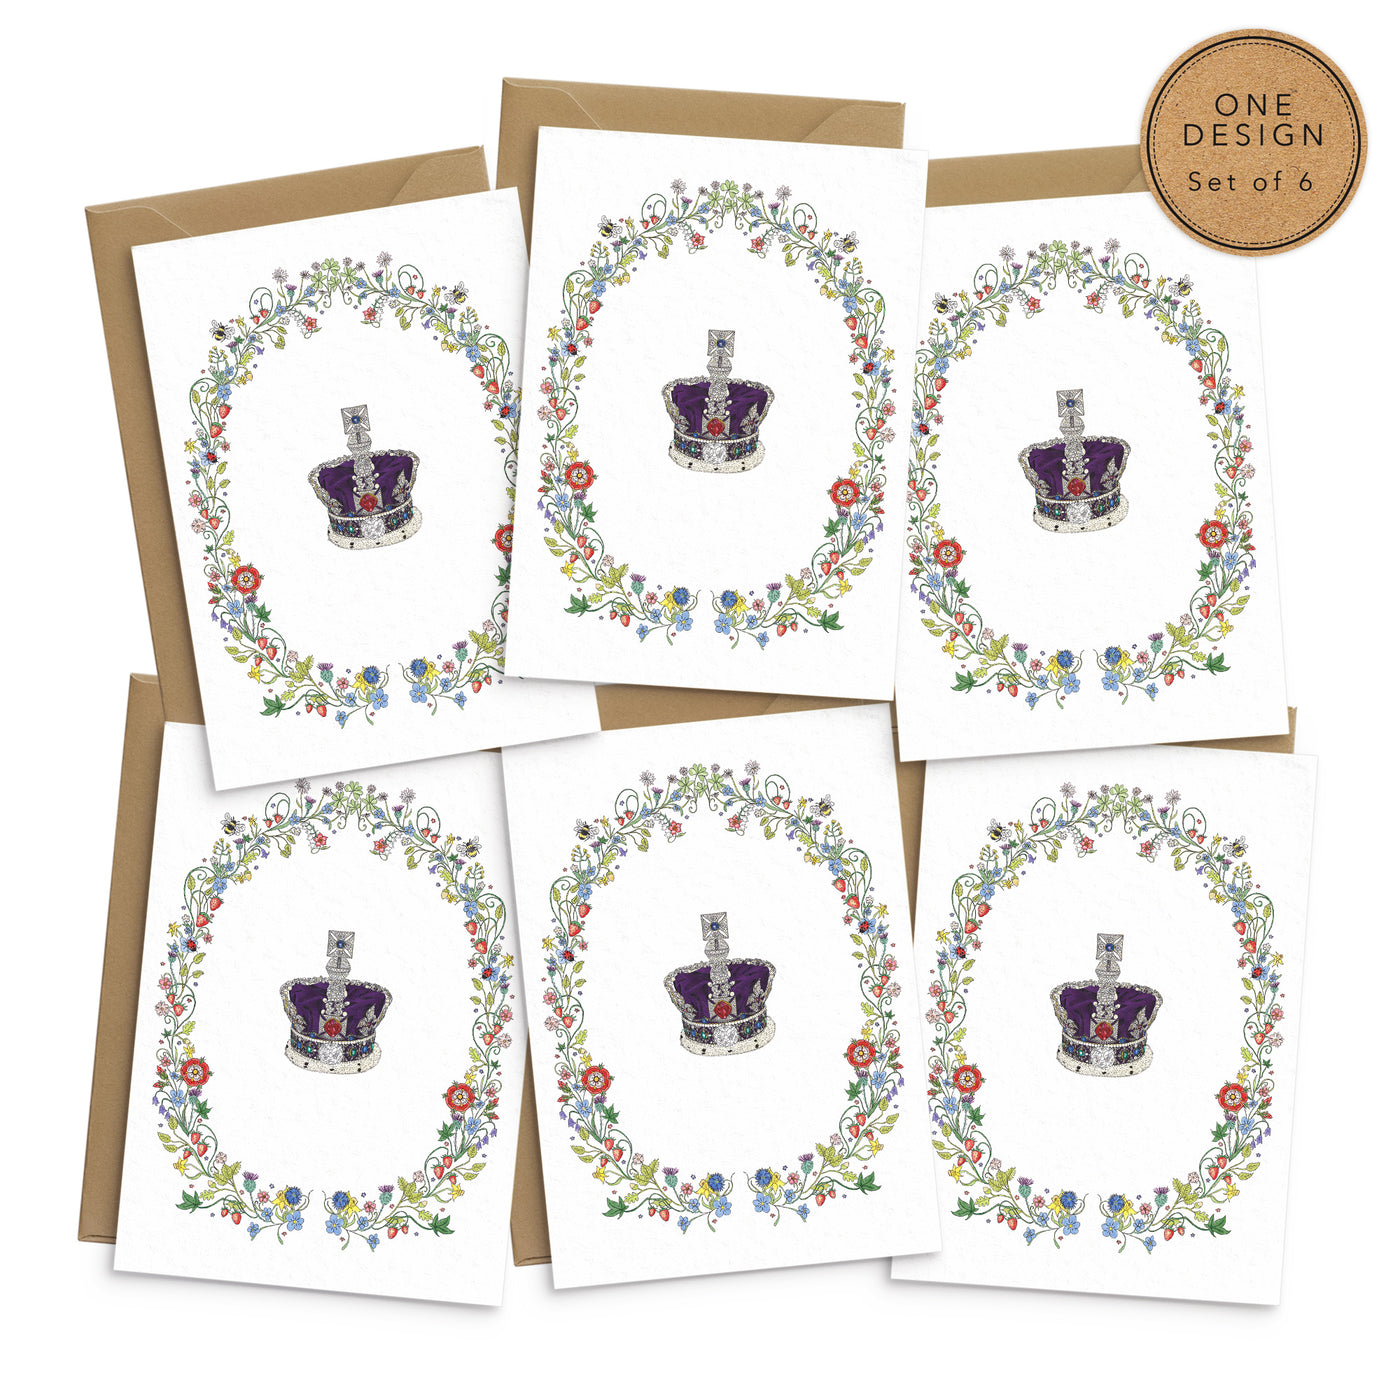 King-Charles-Coronation-Invitation-British-Crown-Jewels-Floral-Greetings-Card-Set-Of-6-Poppins-and-co